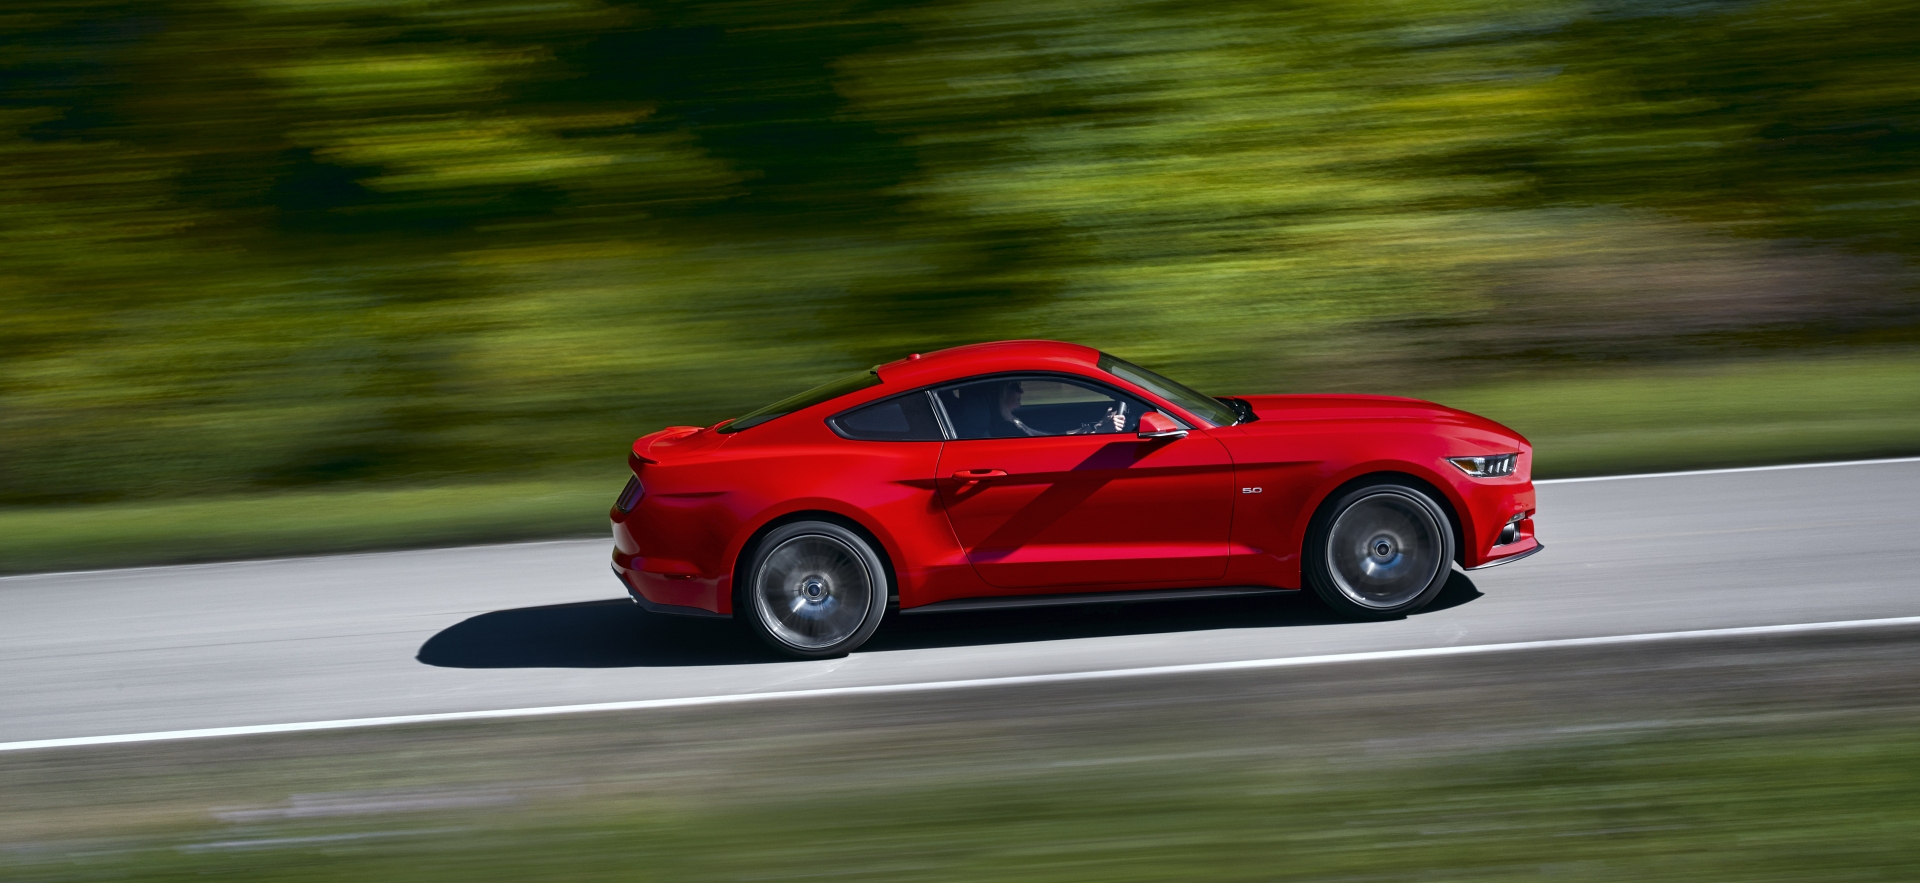 2017 Ford Mustang GT Review - Red Exterior - Side View